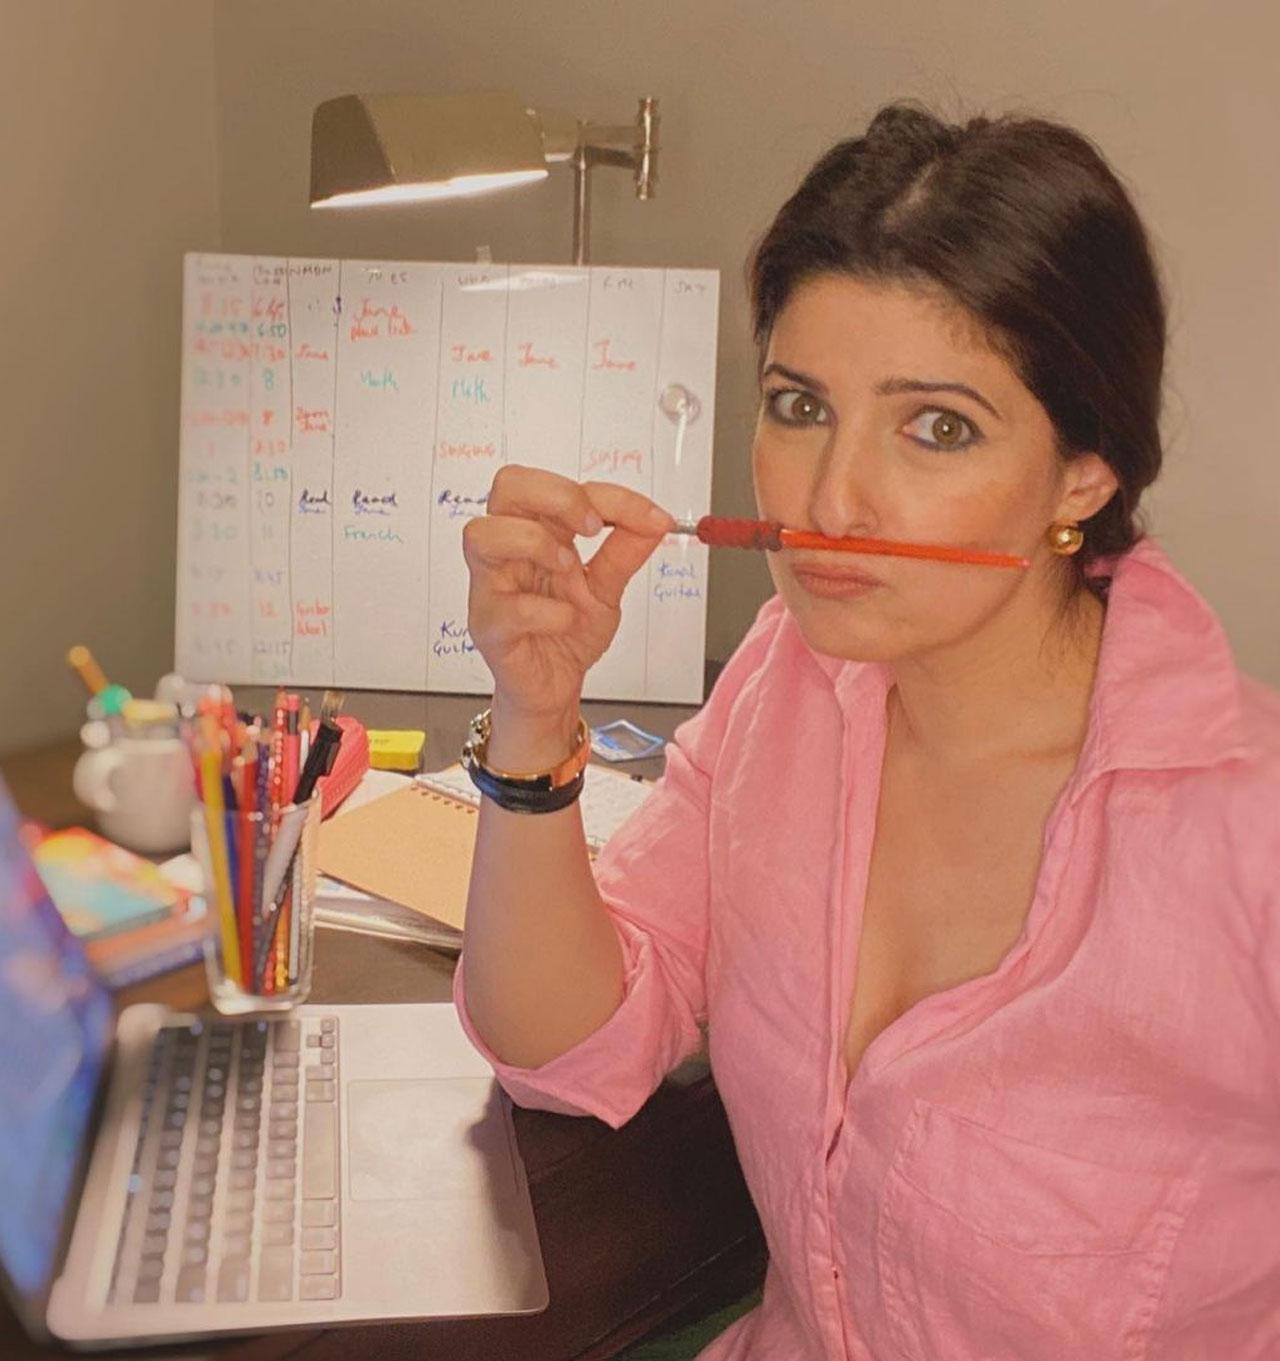 Goofing around with paintbrush 
Twinkle Khanna is an actor and an author. As she was working on her book, she took out some time to goof around with her paintbrush and paint fake mustaches. It was a candid and honest post. And also very amusing.